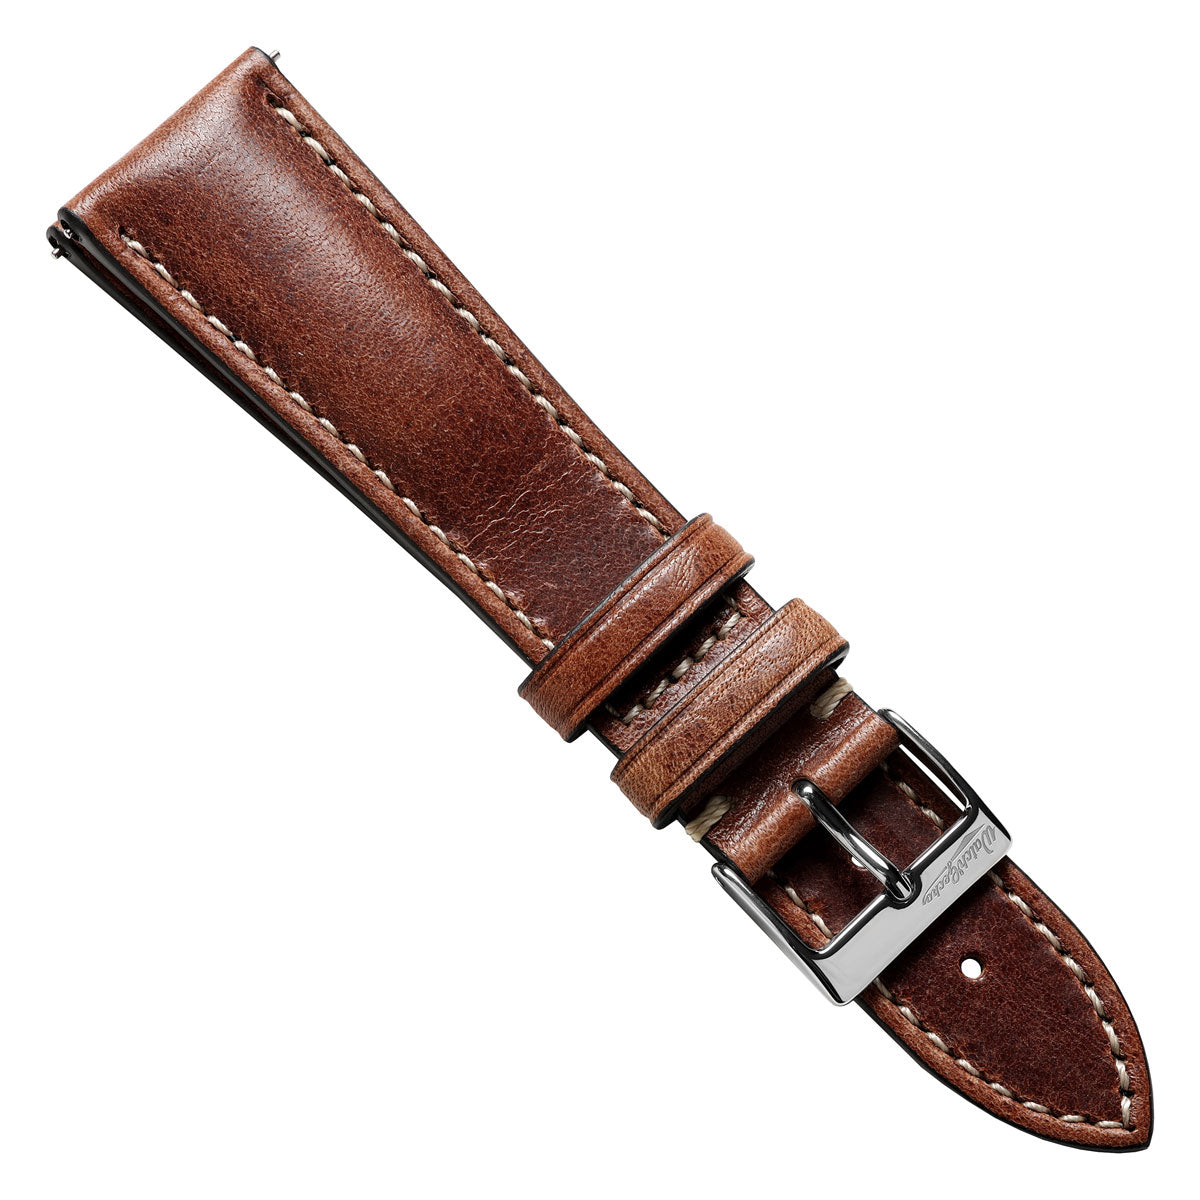 Classic Highley Genuine Leather Watch Strap - Reddish Brown